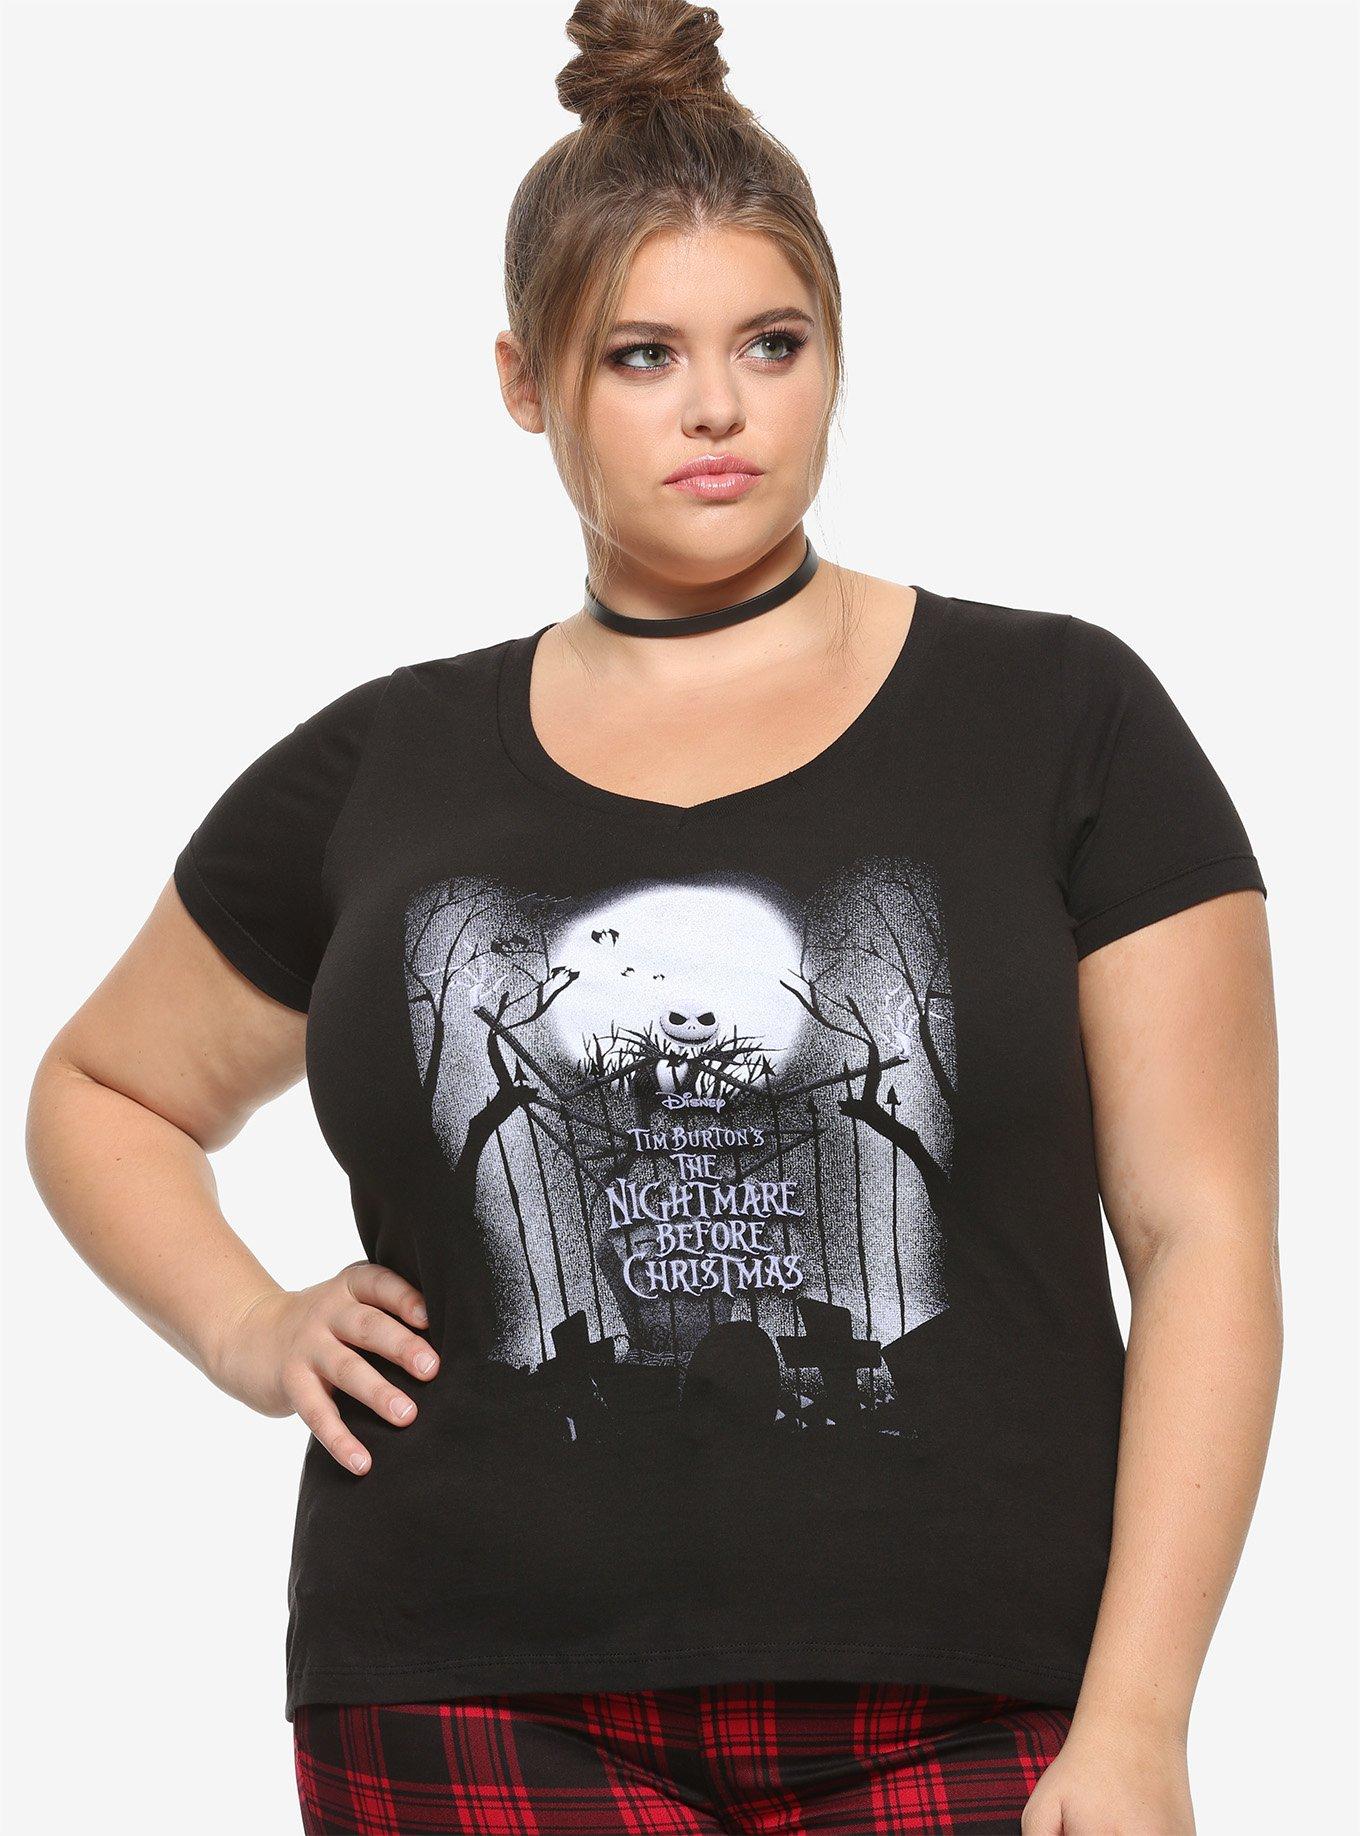 The Nightmare Before Christmas Jack's Poem Girls T-Shirt Plus Size, MULTI, hi-res